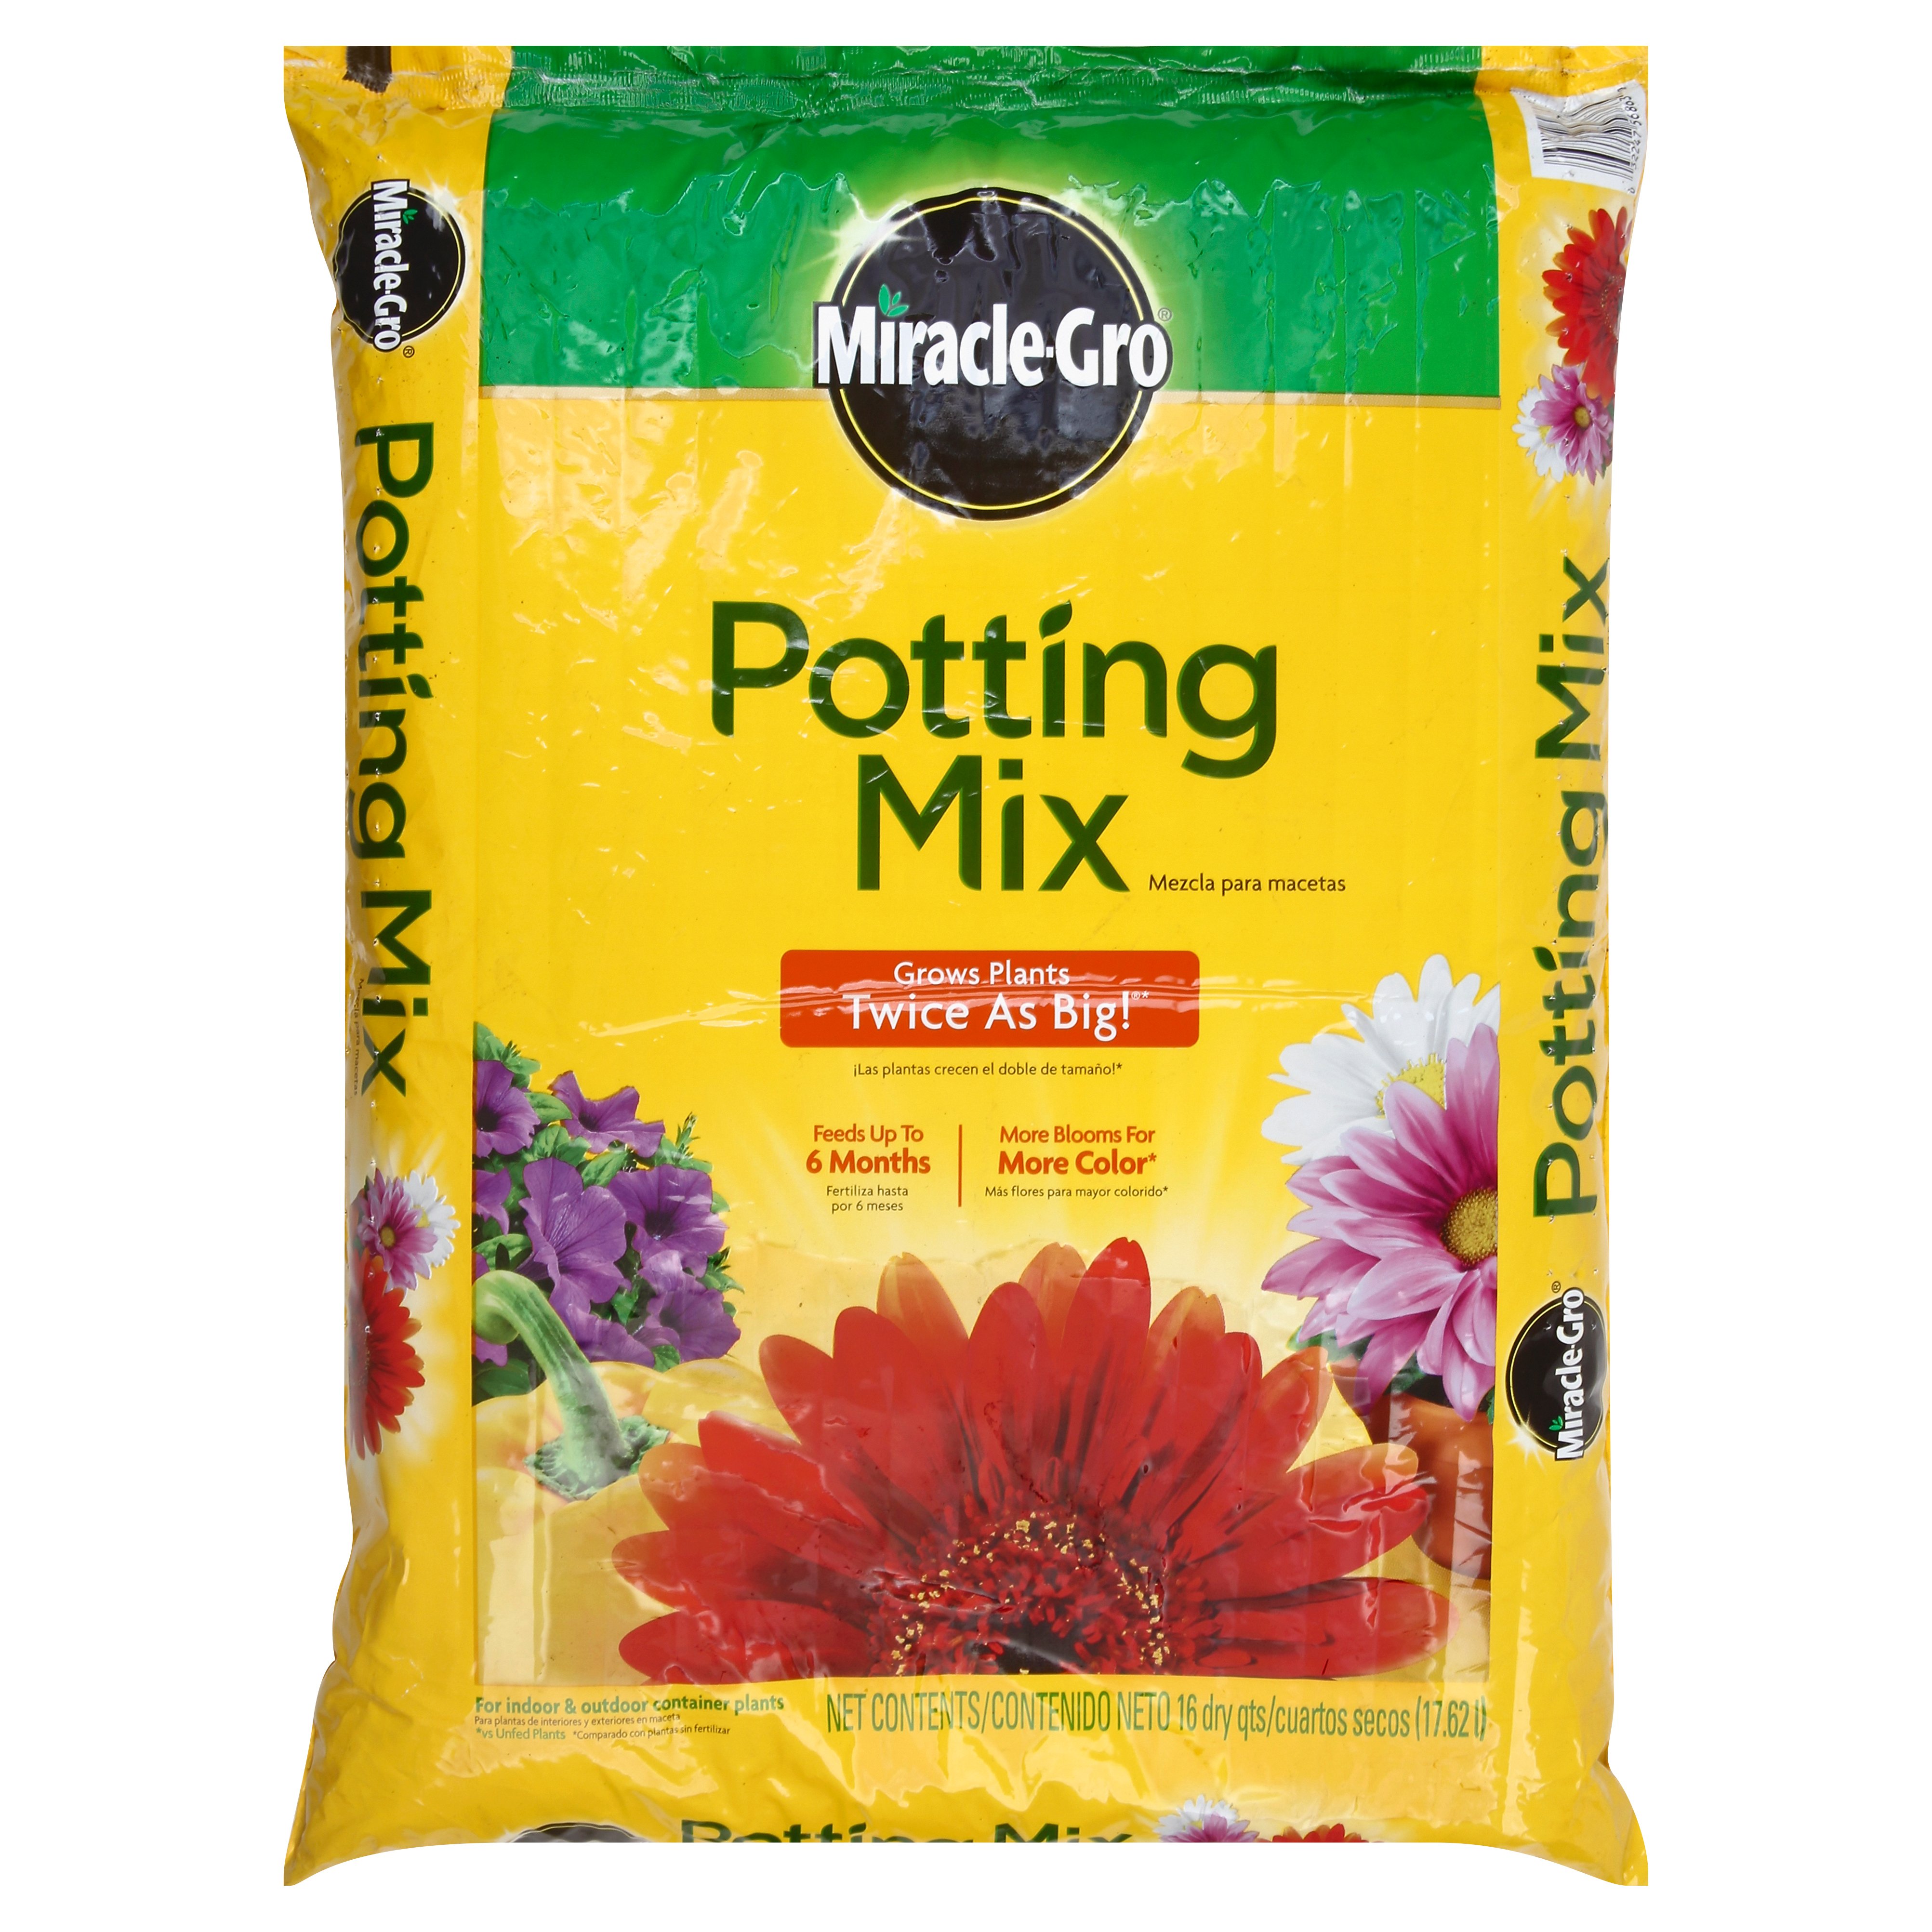 Miracle Gro Premium Potting Mix Shop Soil Mulch At H E B,Thank You Note For Gift